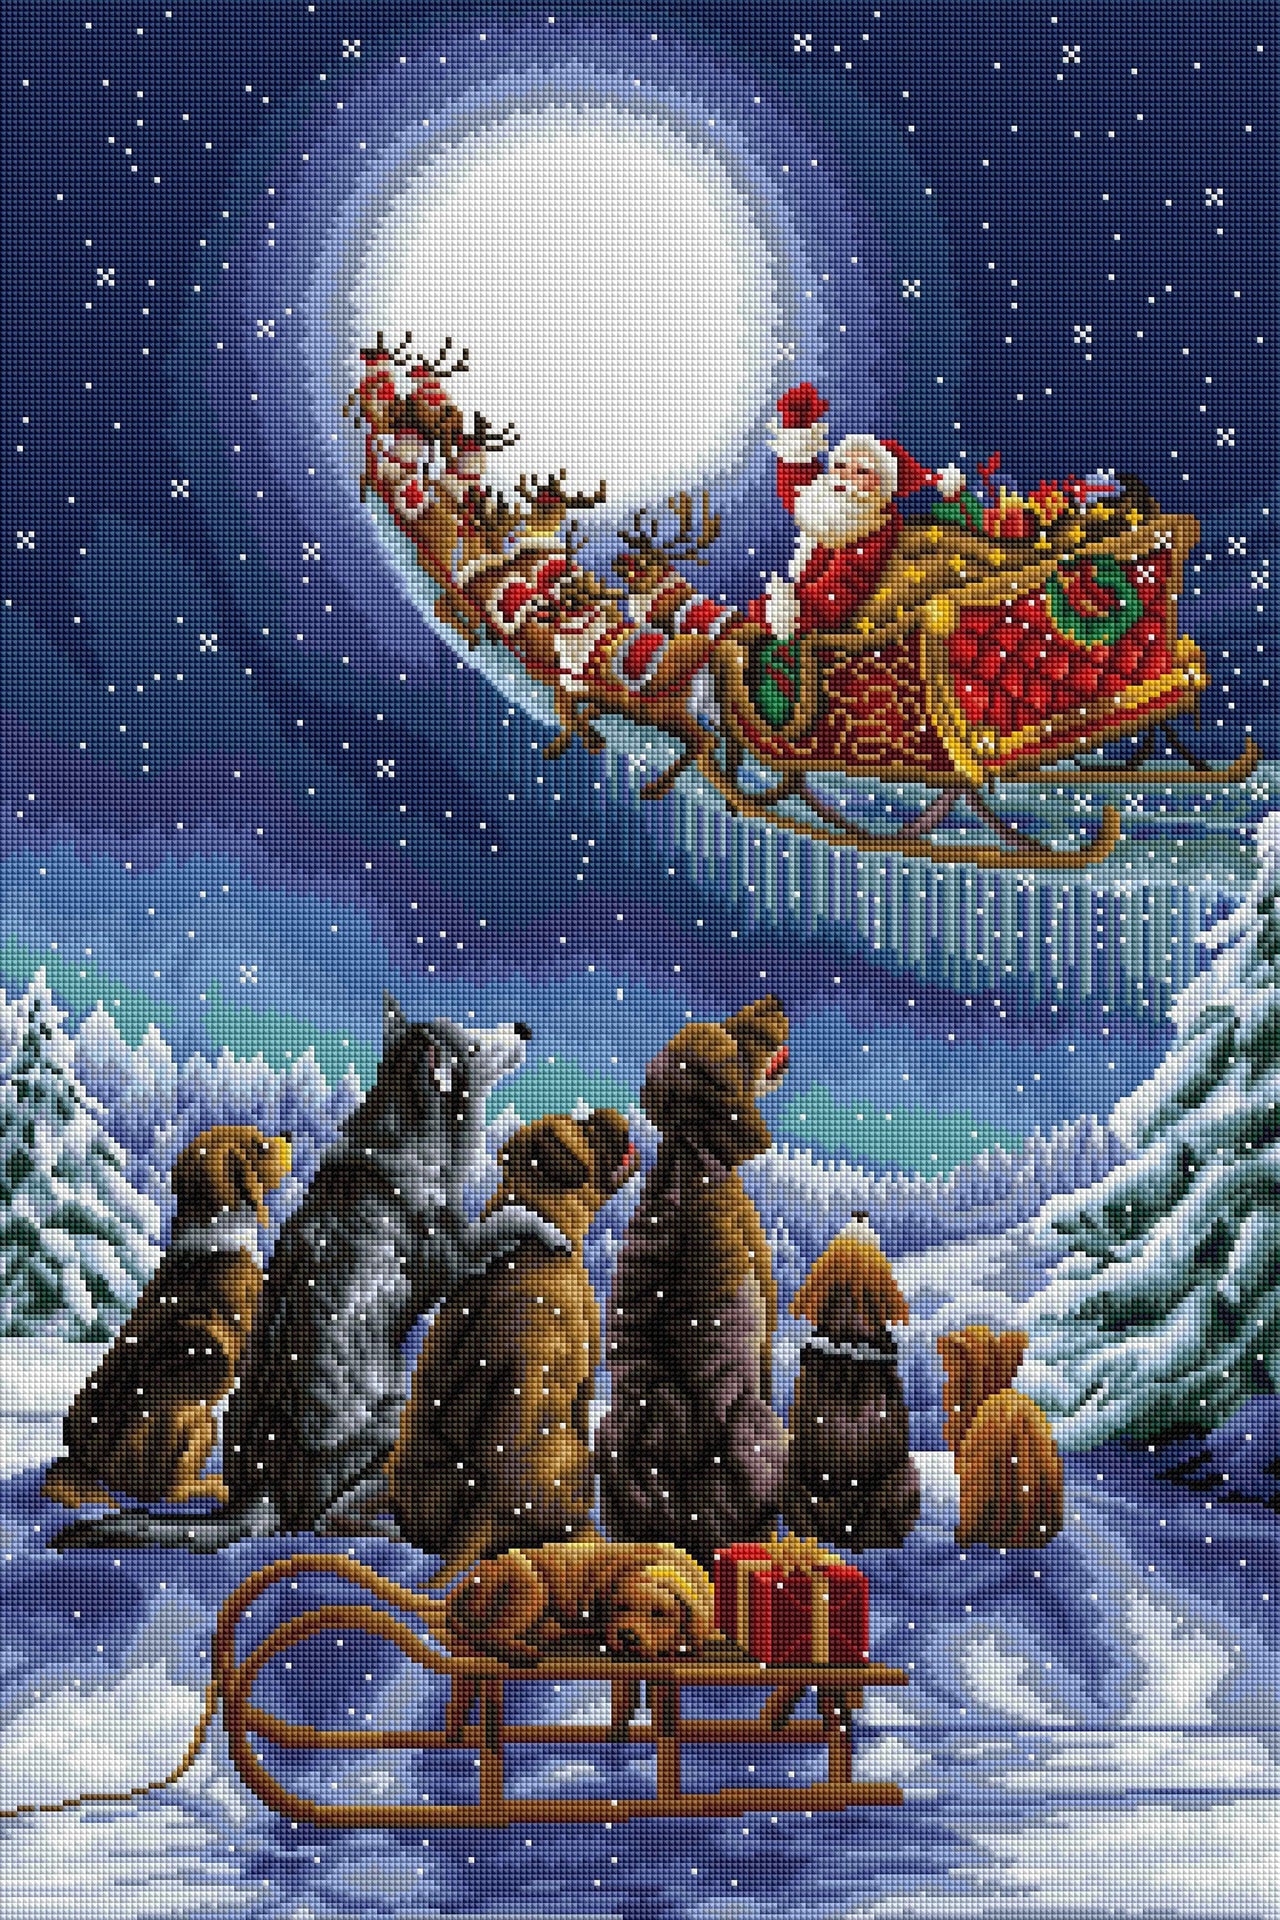 Diamond Painting Watching Santa Go 22" x 33" (56cm x 84cm) / Square with 61 Colors including 4 ABs / 75,264